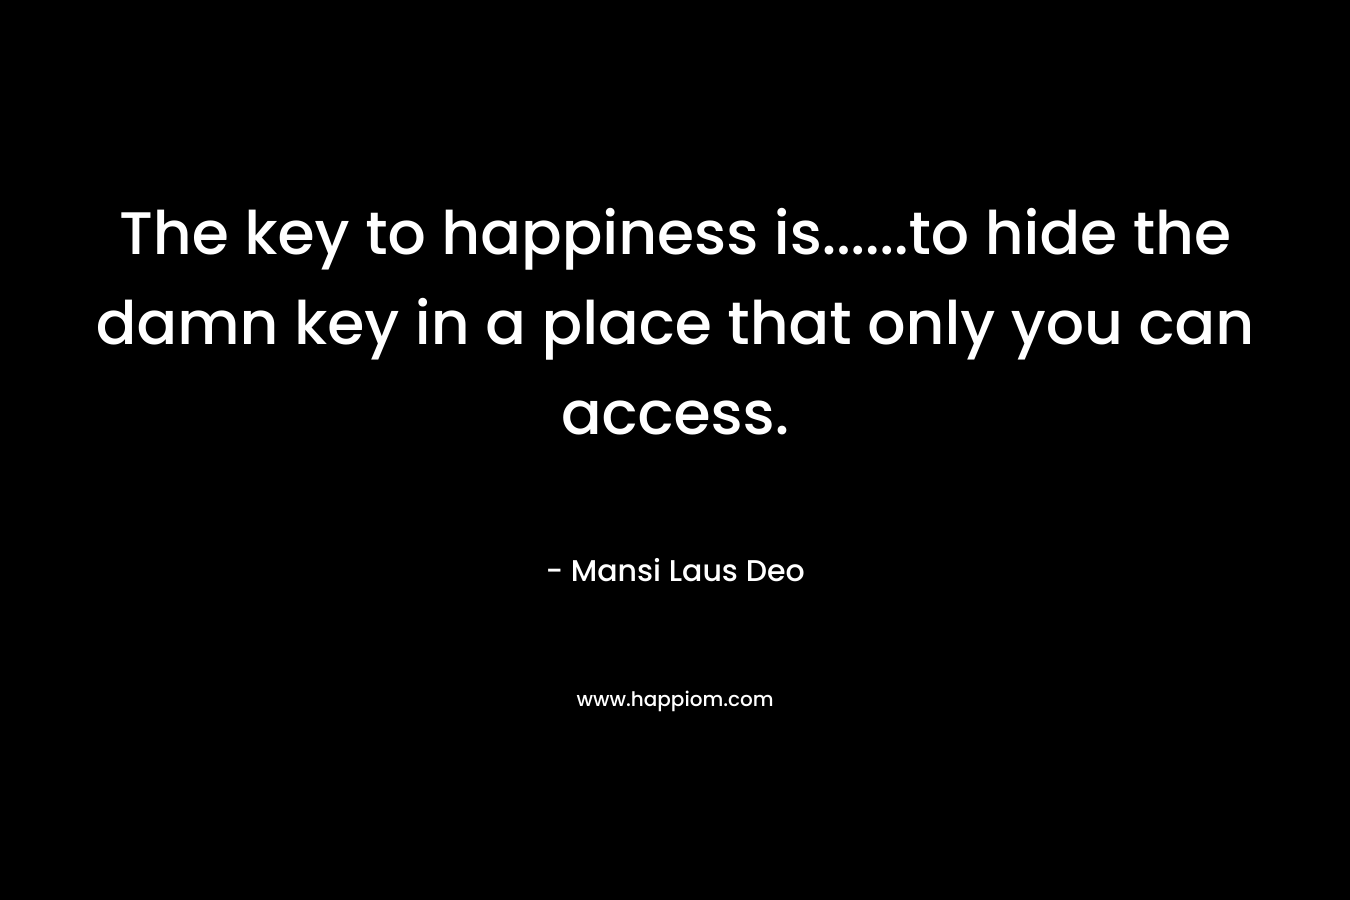 The key to happiness is......to hide the damn key in a place that only you can access.